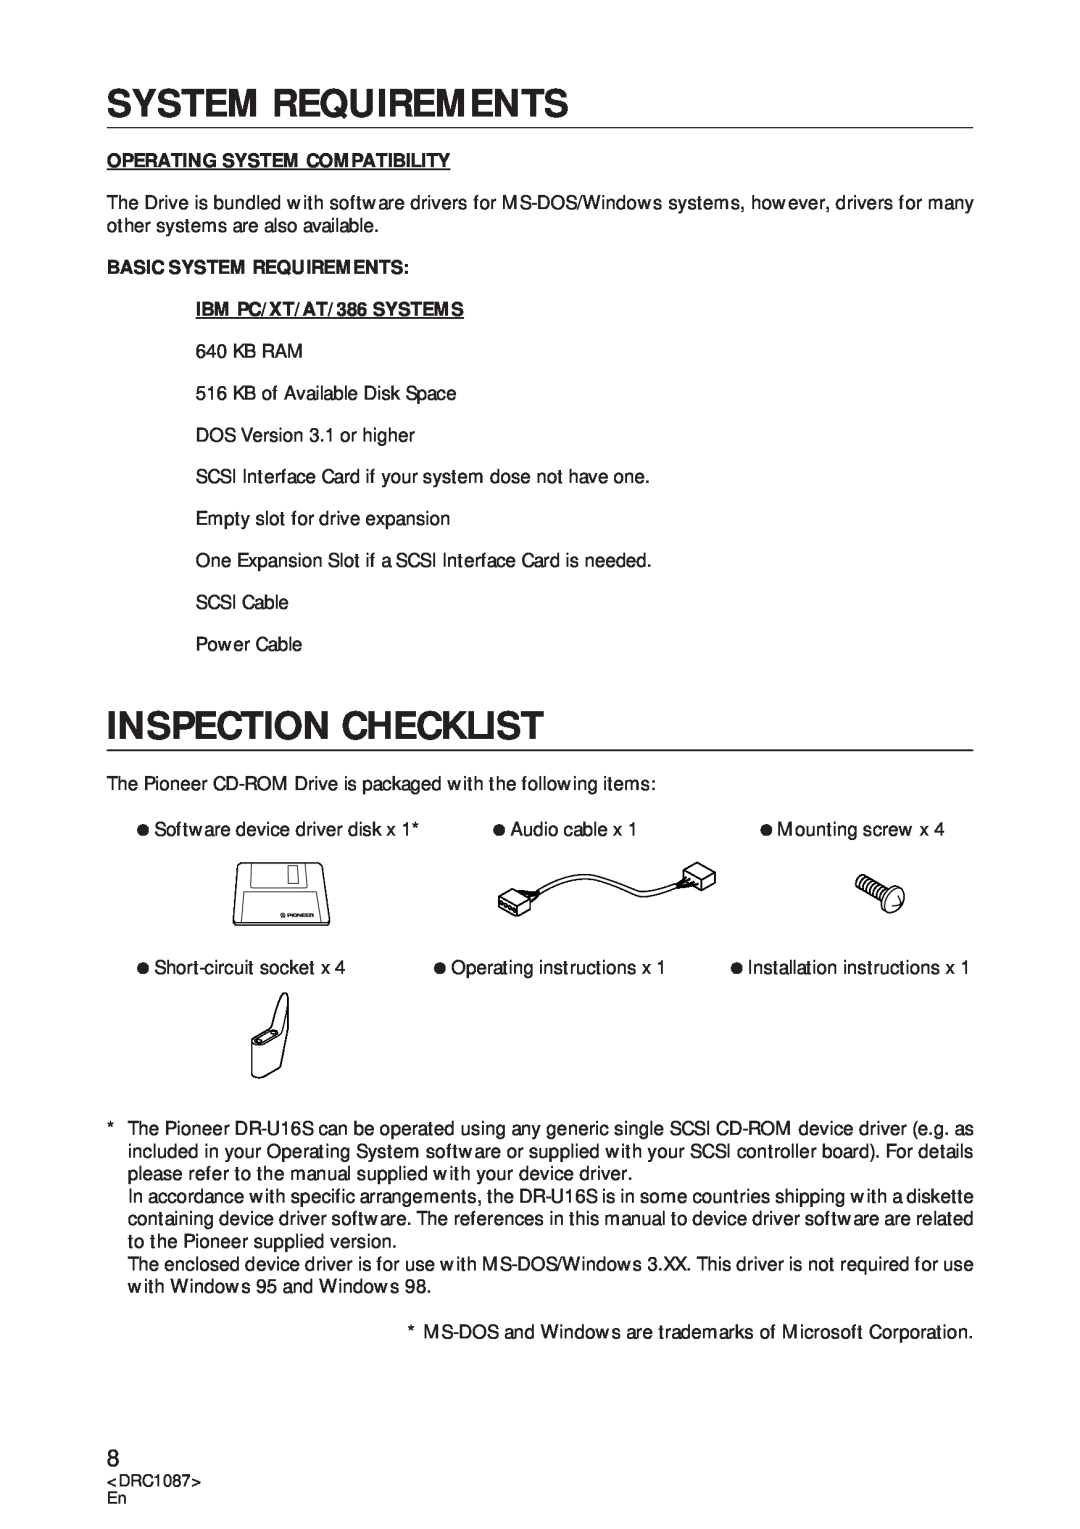 Pioneer DR-U16S user service System Requirements, Inspection Checklist, Operating System Compatibility 